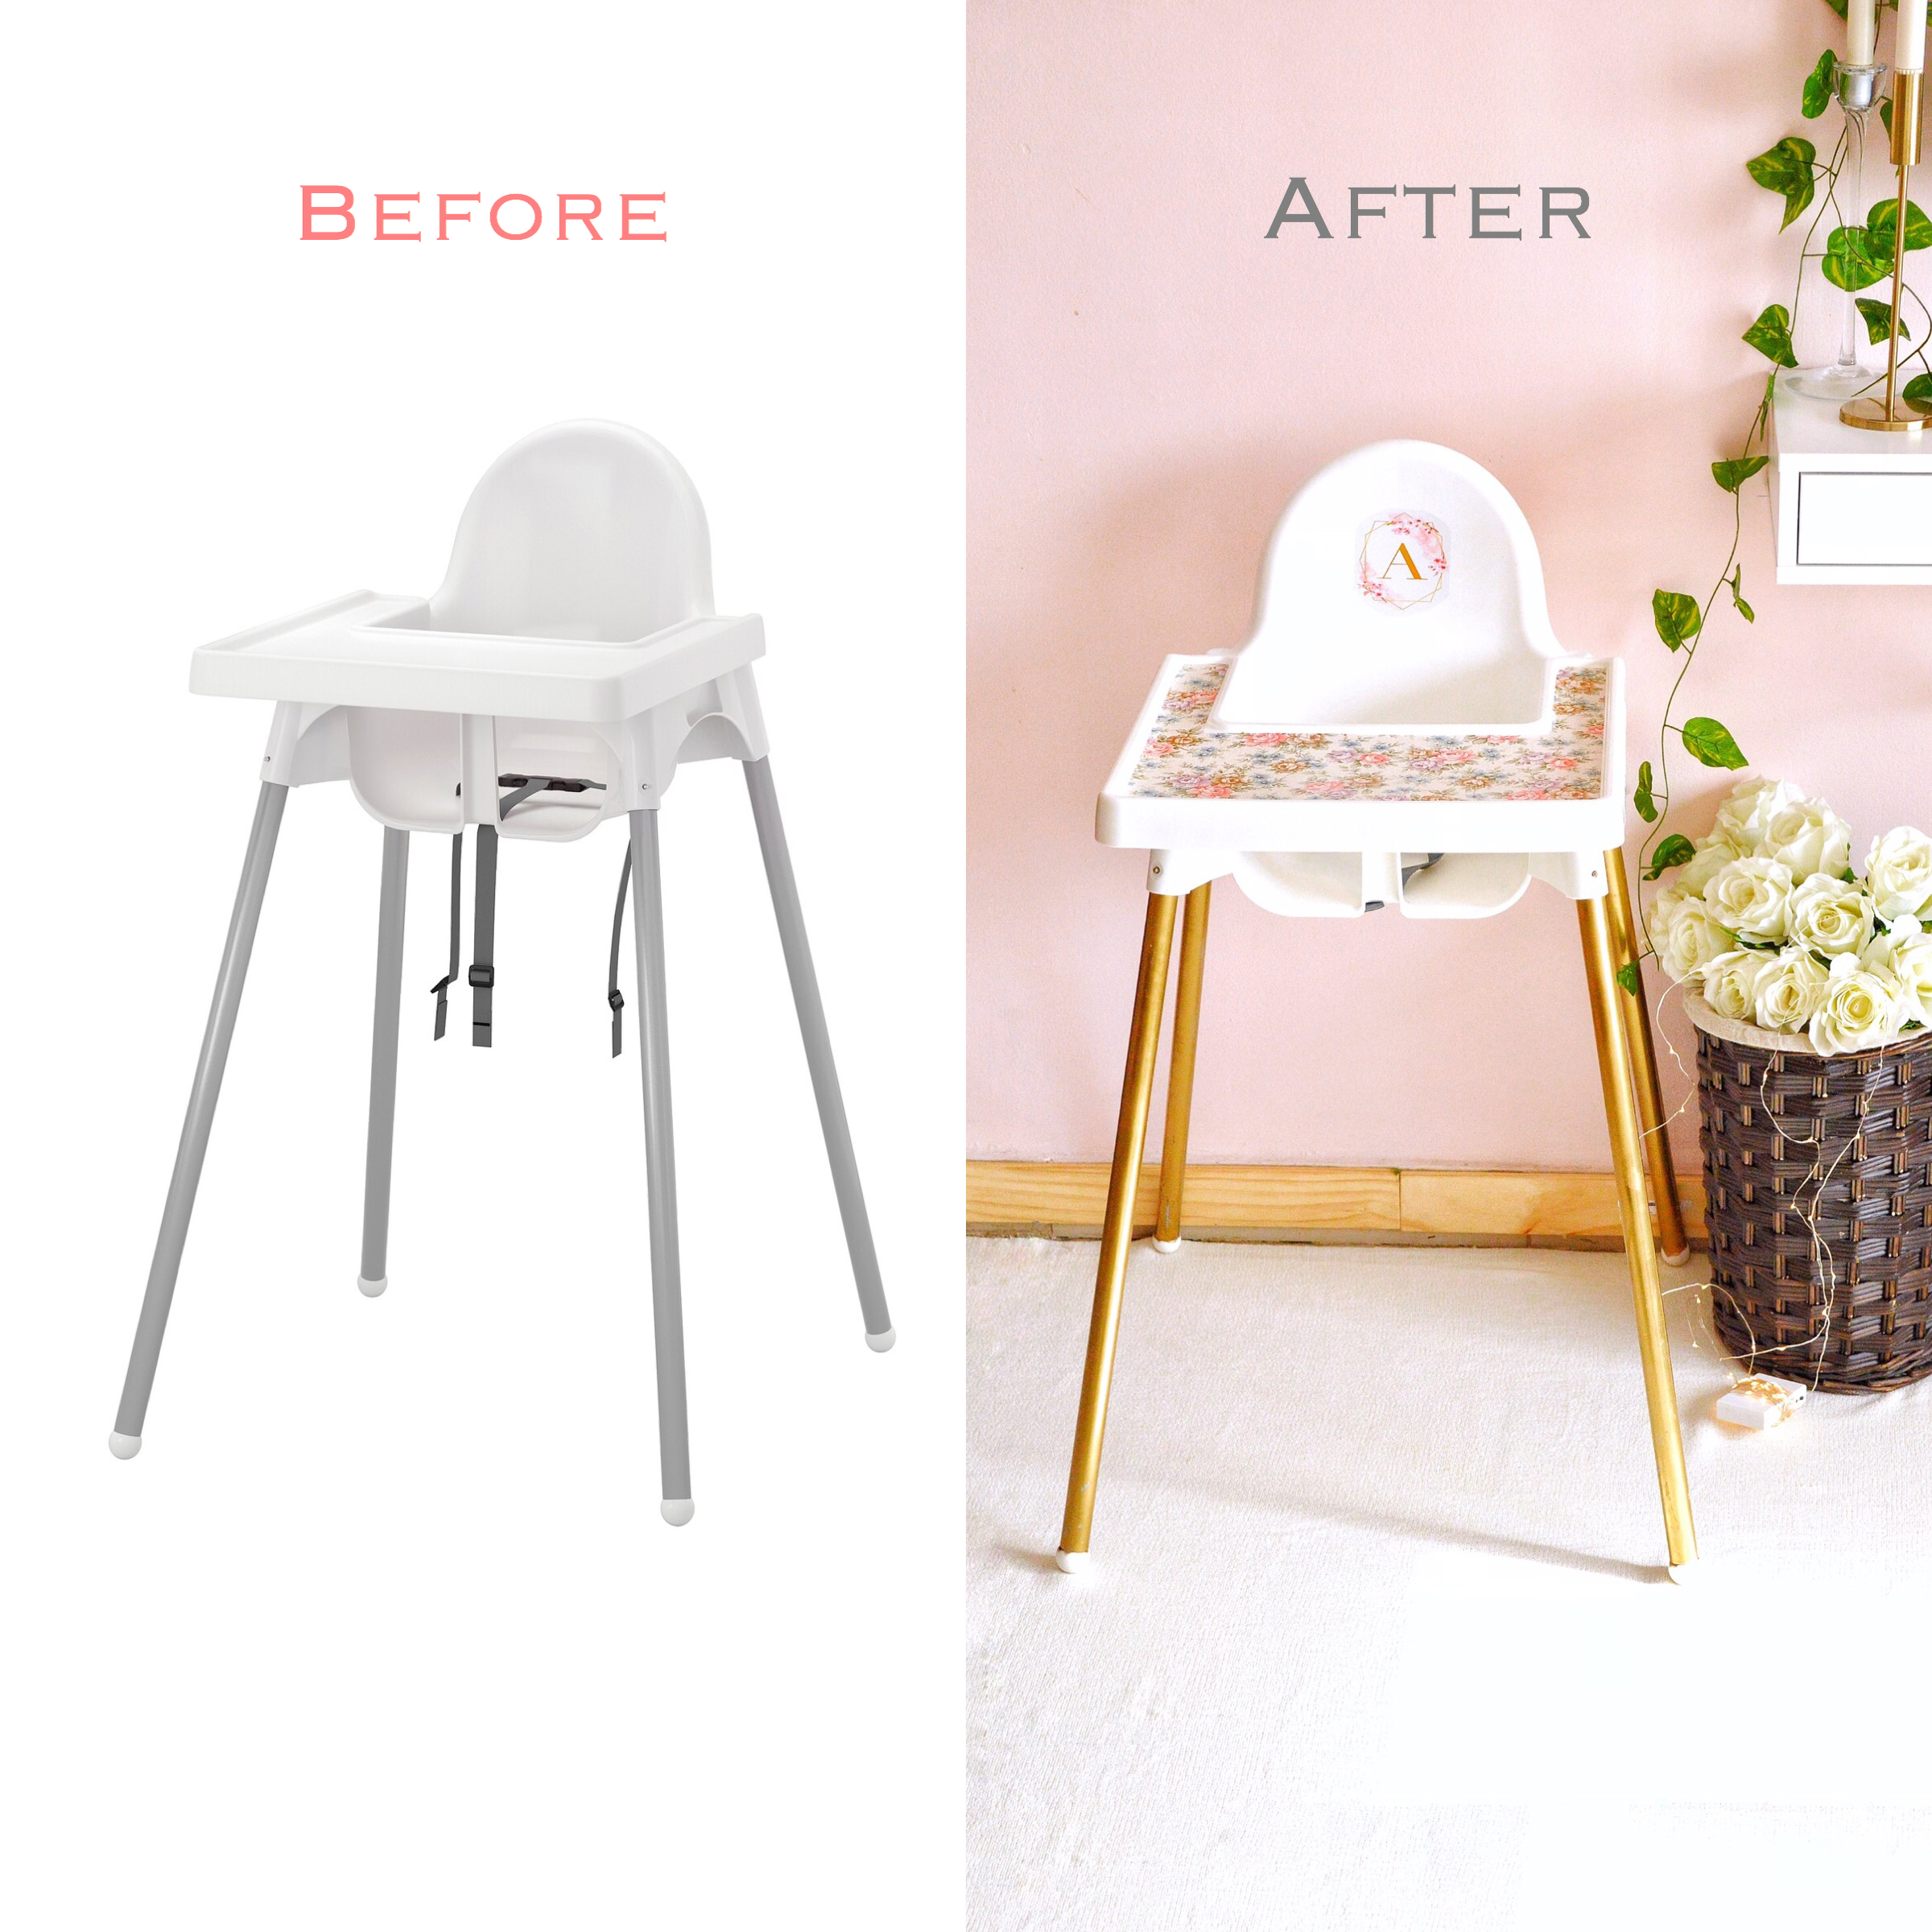 IKEA Antilop Baby Chair Makeover 